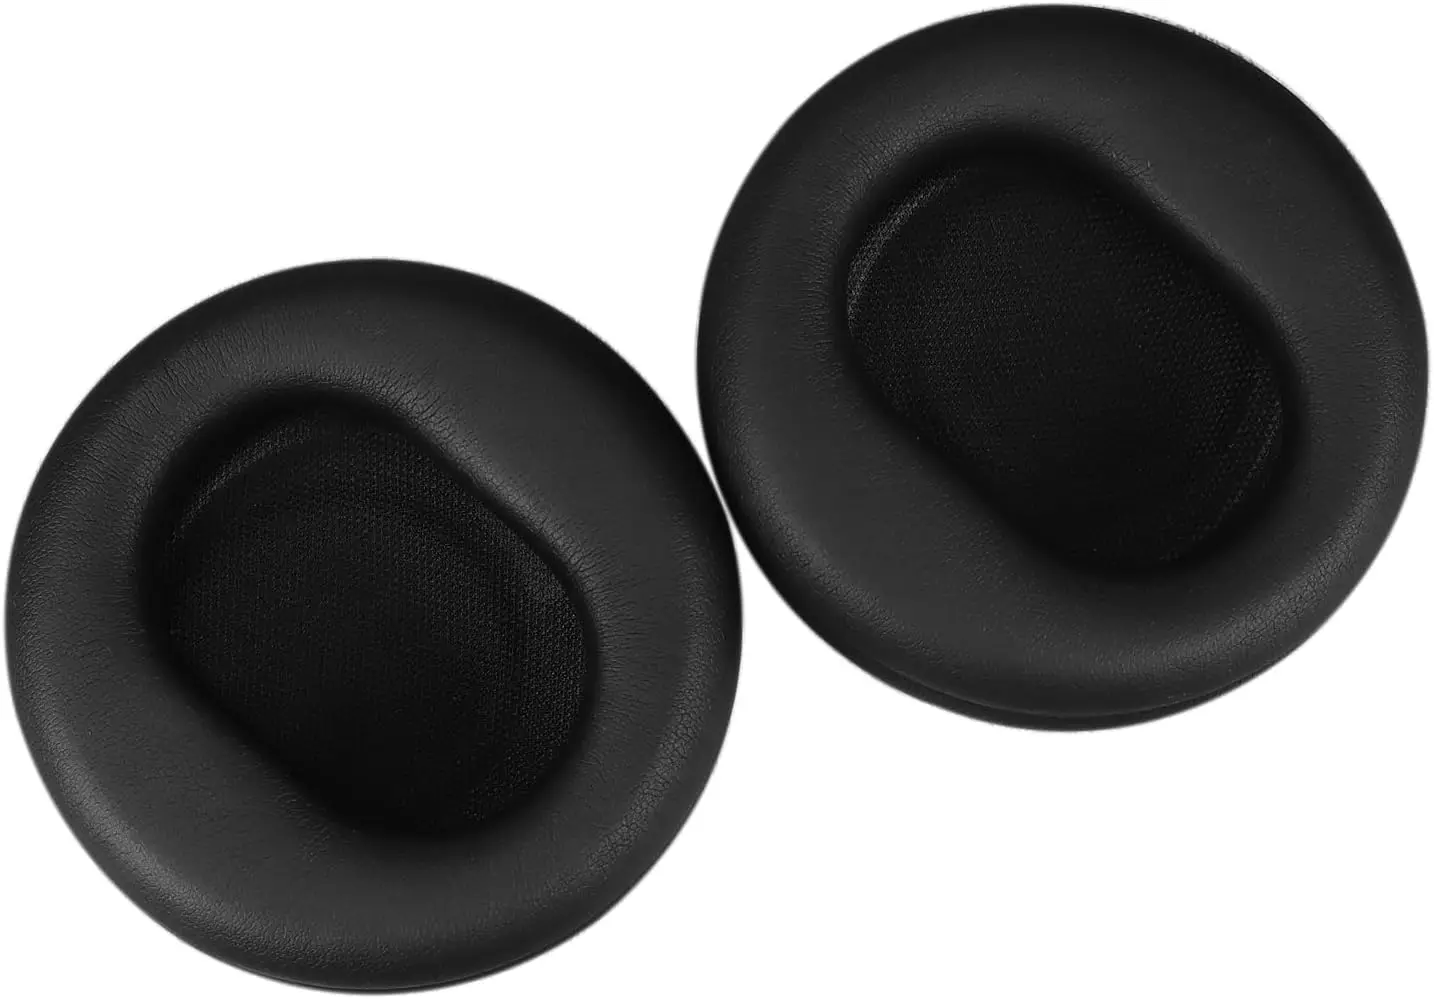 

Replacement Earpads for Microsoft Surface Headphones 1 2 Wireless Noise Cancellation Headsets,Ear Pads Cushions with High-Densit